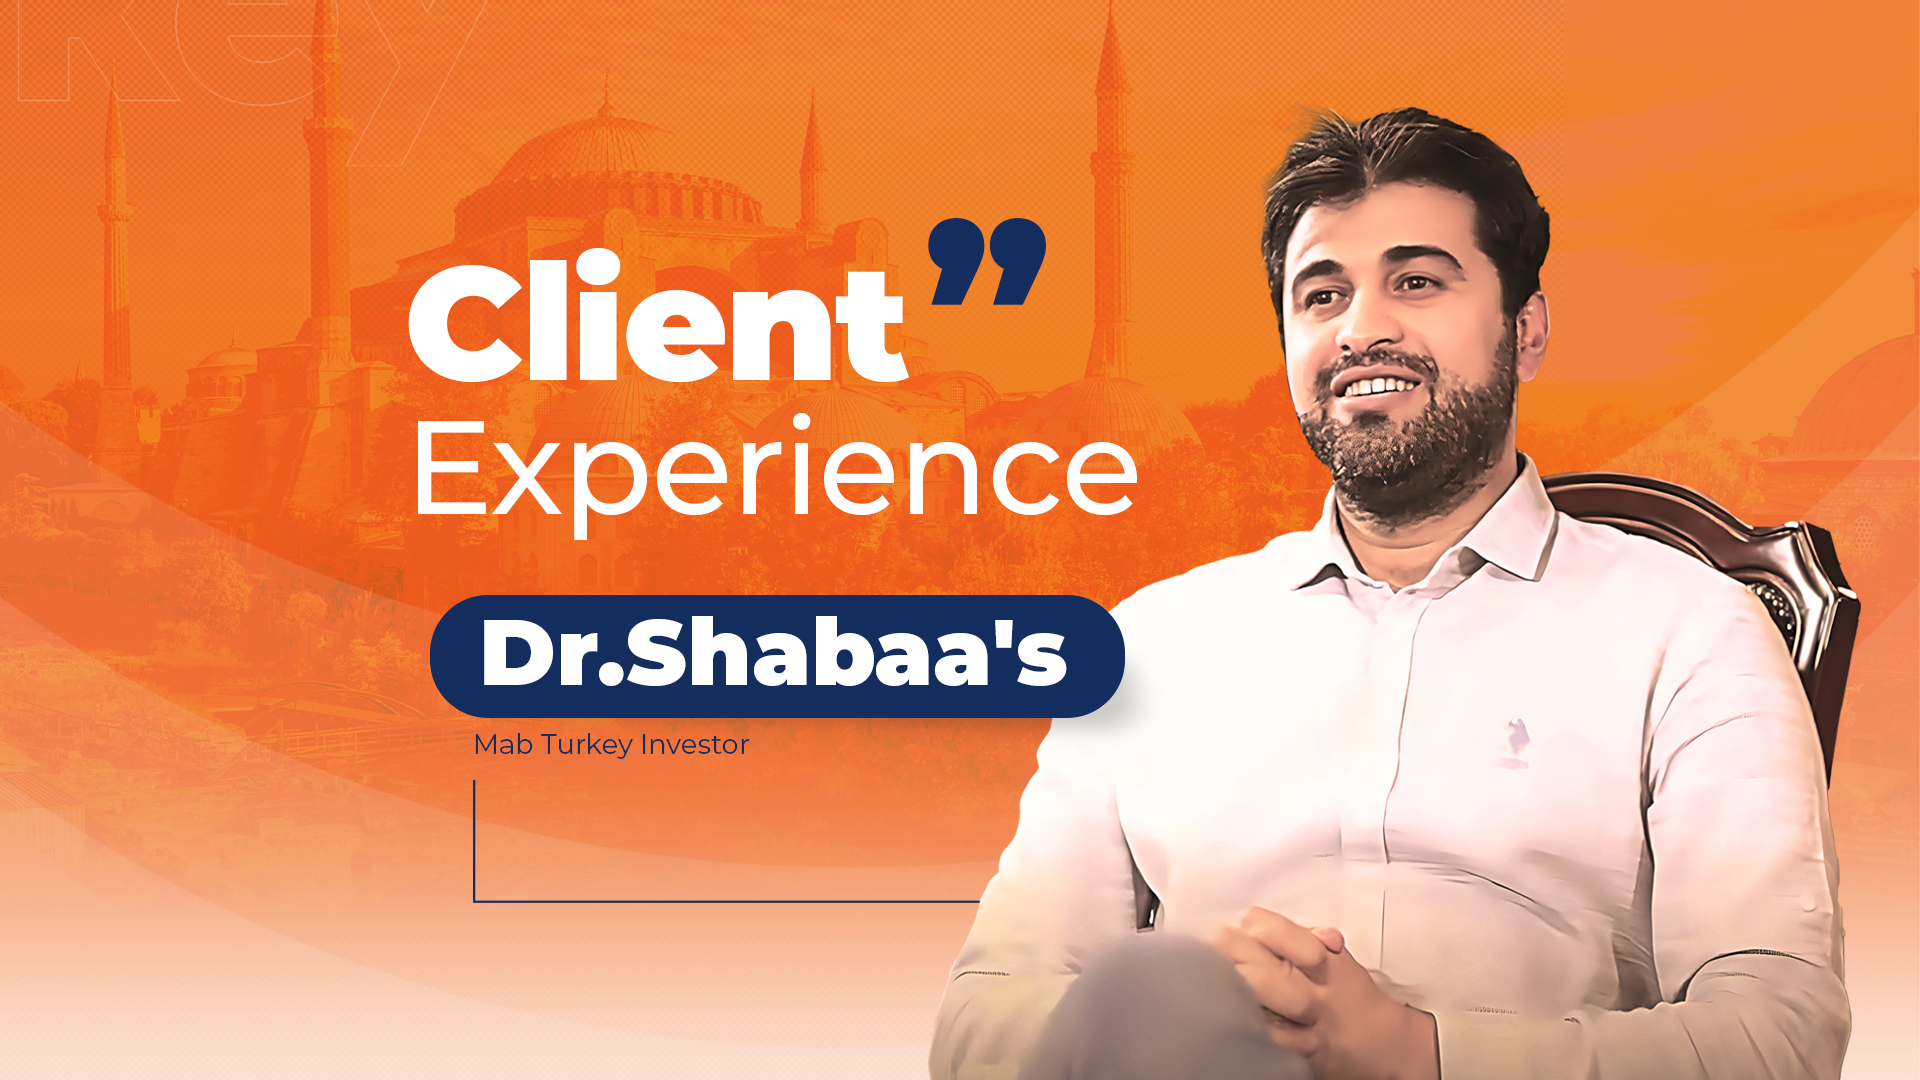 Dr.Shabaa's experience in realestate investment with MABTurkey